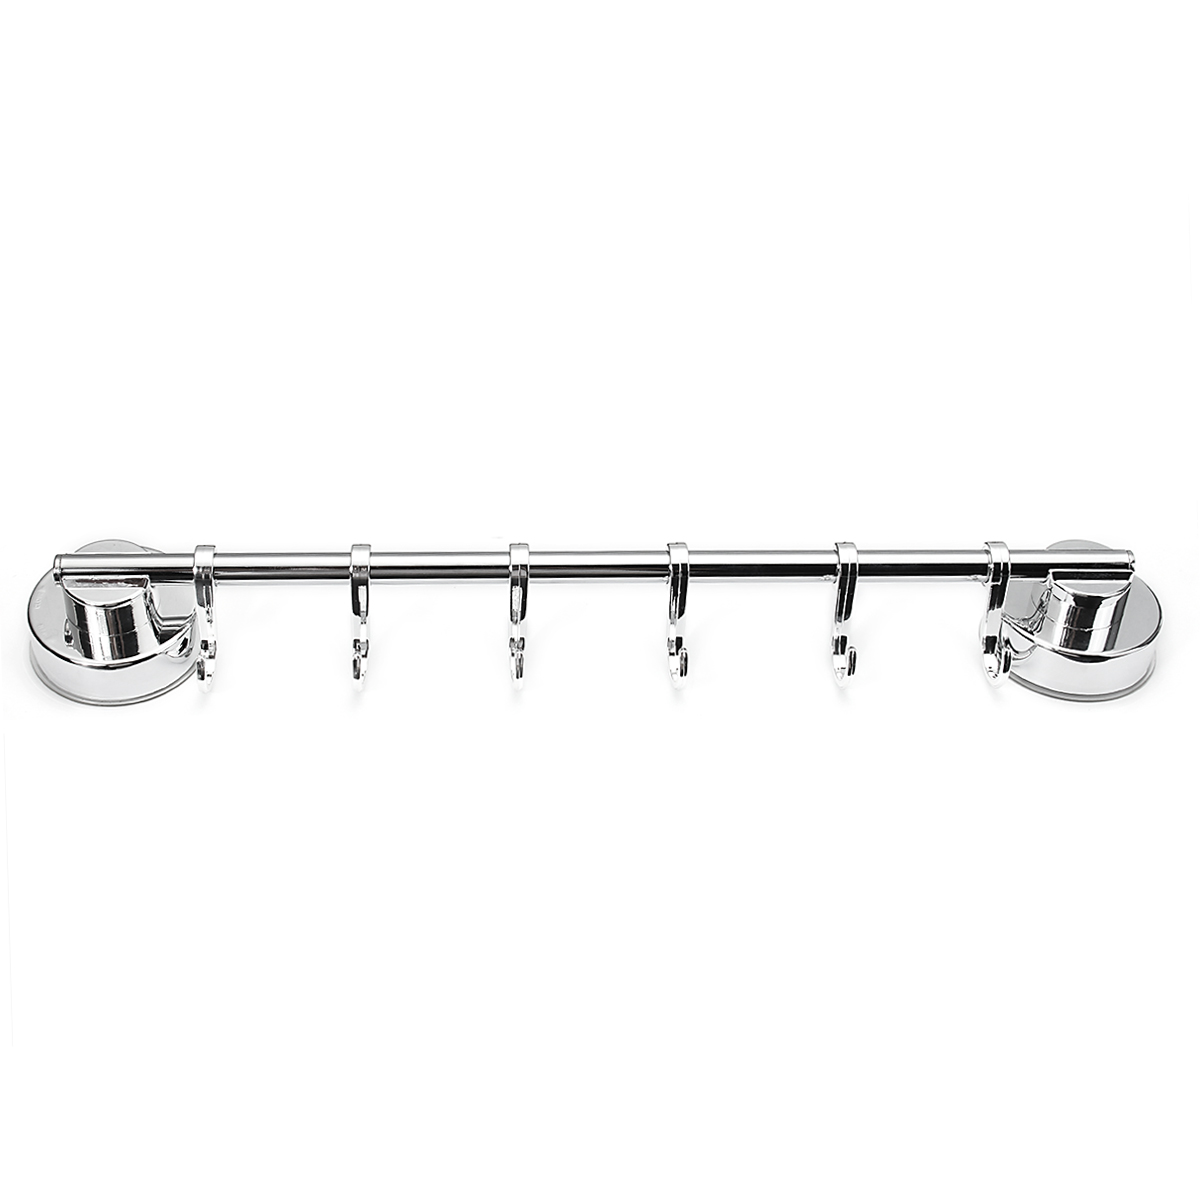 Stainless-Steel-Suction-Cup-Hanger-Hooks-Kitchen-Rack-Clothes-Hanging-Holders-Home-Hooks-1589624-4